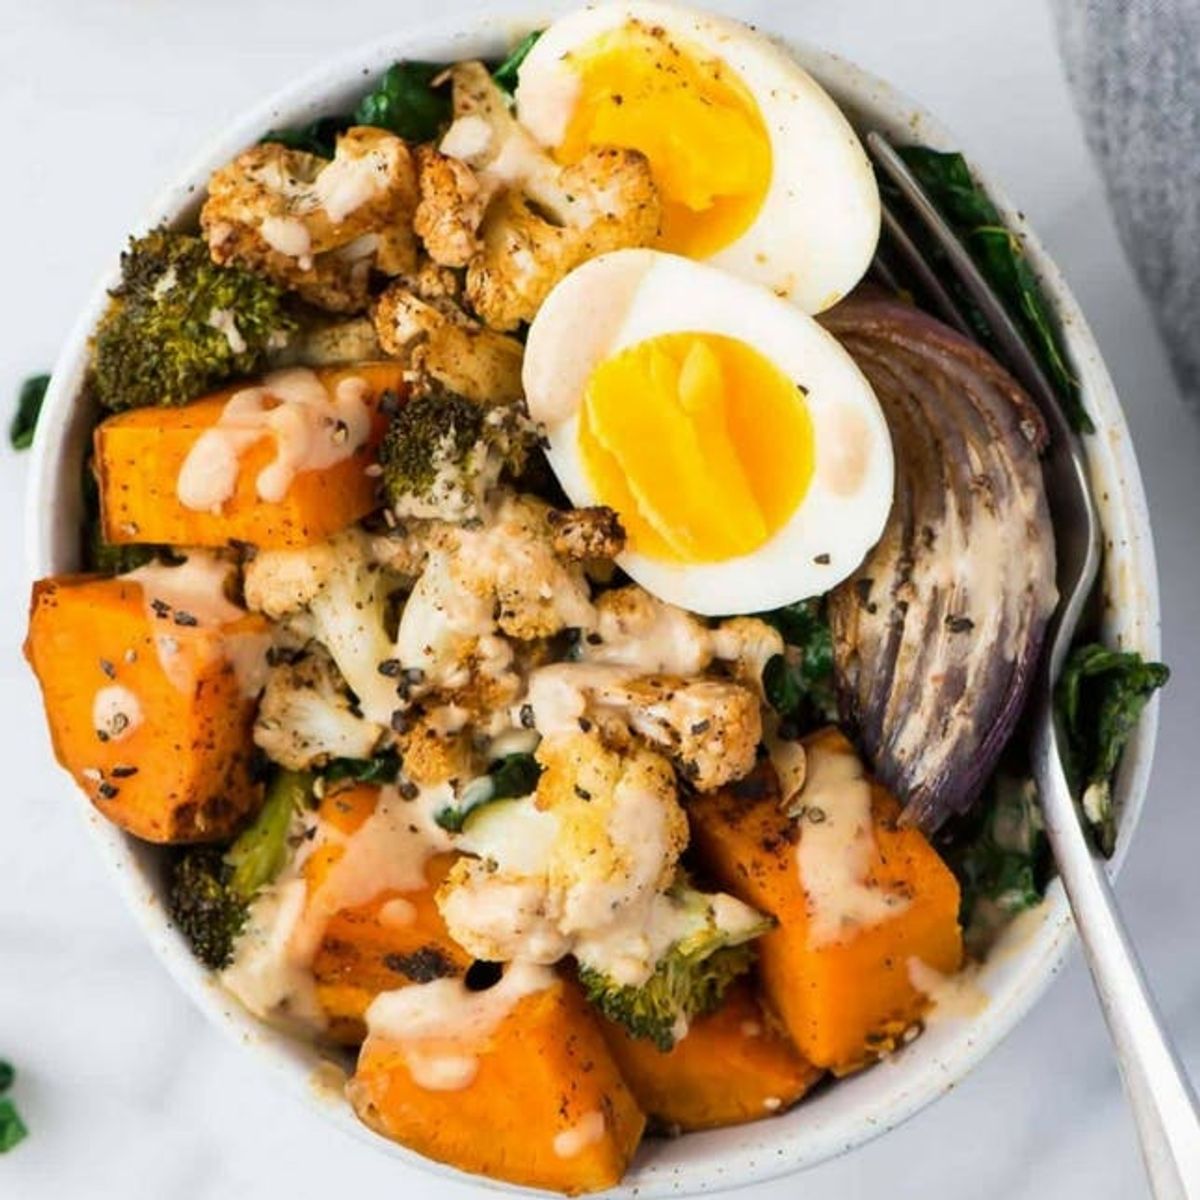 16 Extra Filling Recipes That Will Reaffirm Your Commitment to the Whole30 Diet